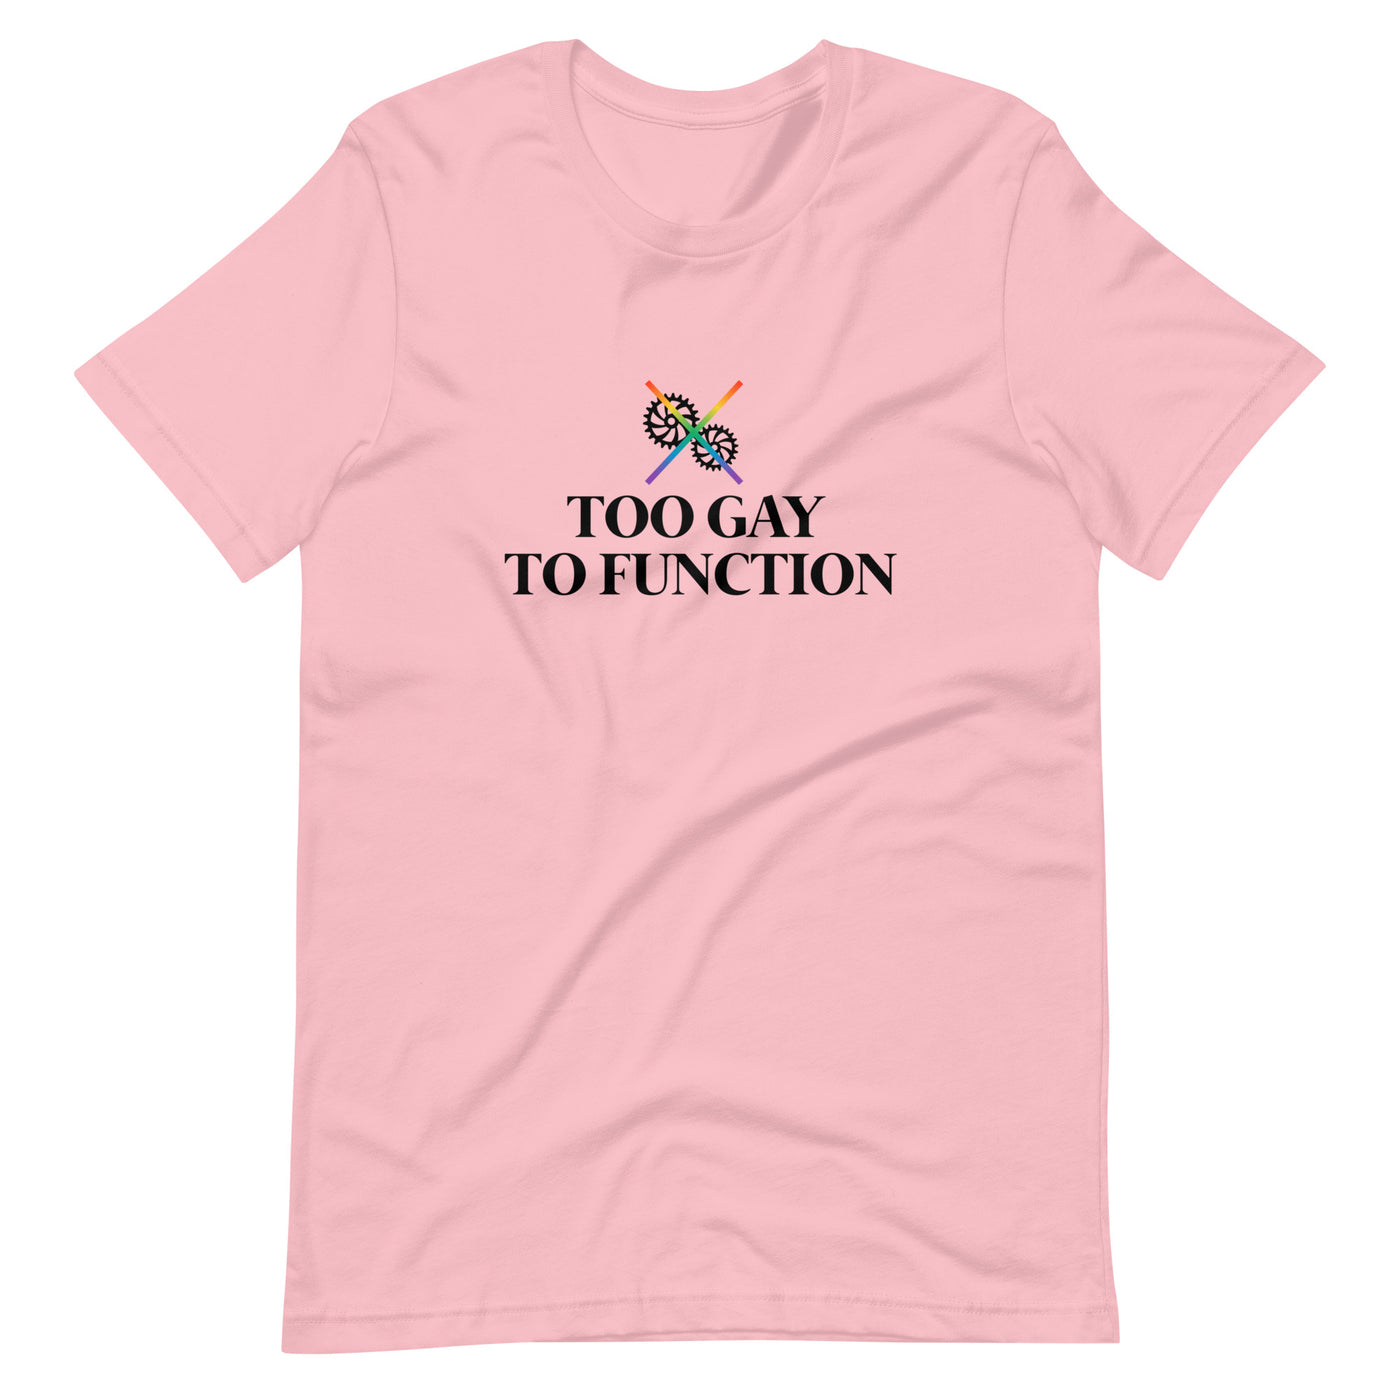 Pride Clothes - Whoa! Too Gay to Function Pride Items T-Shirt - Pink